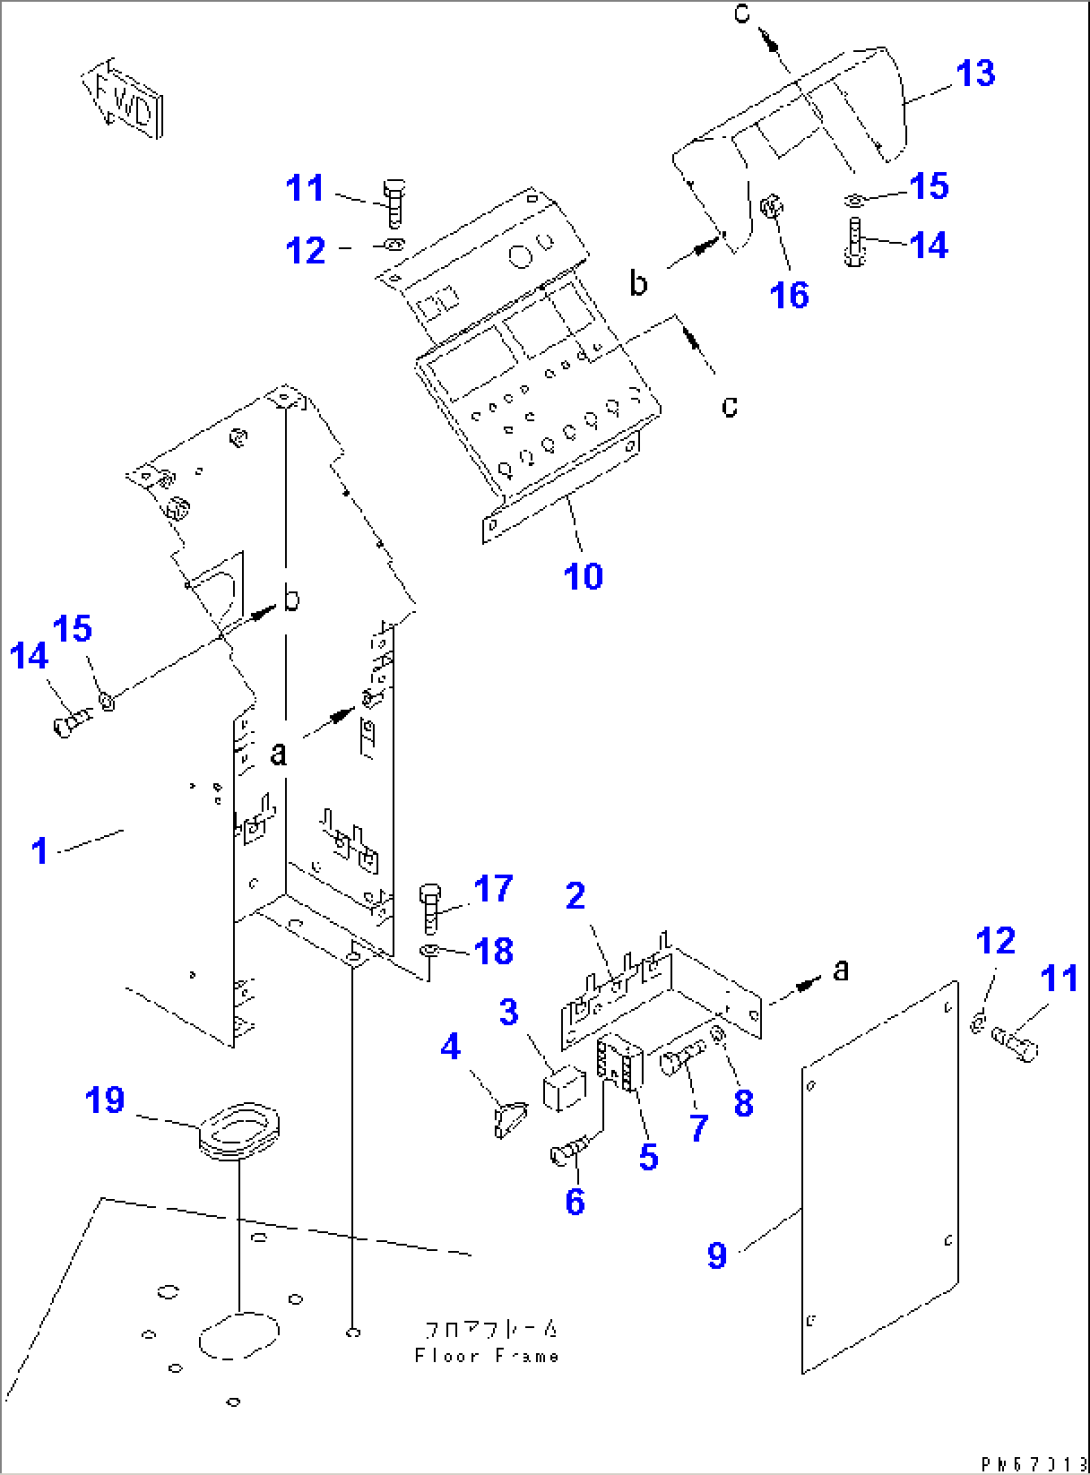 INSTRUMENT PANEL (1/2) (POST AND COVER)